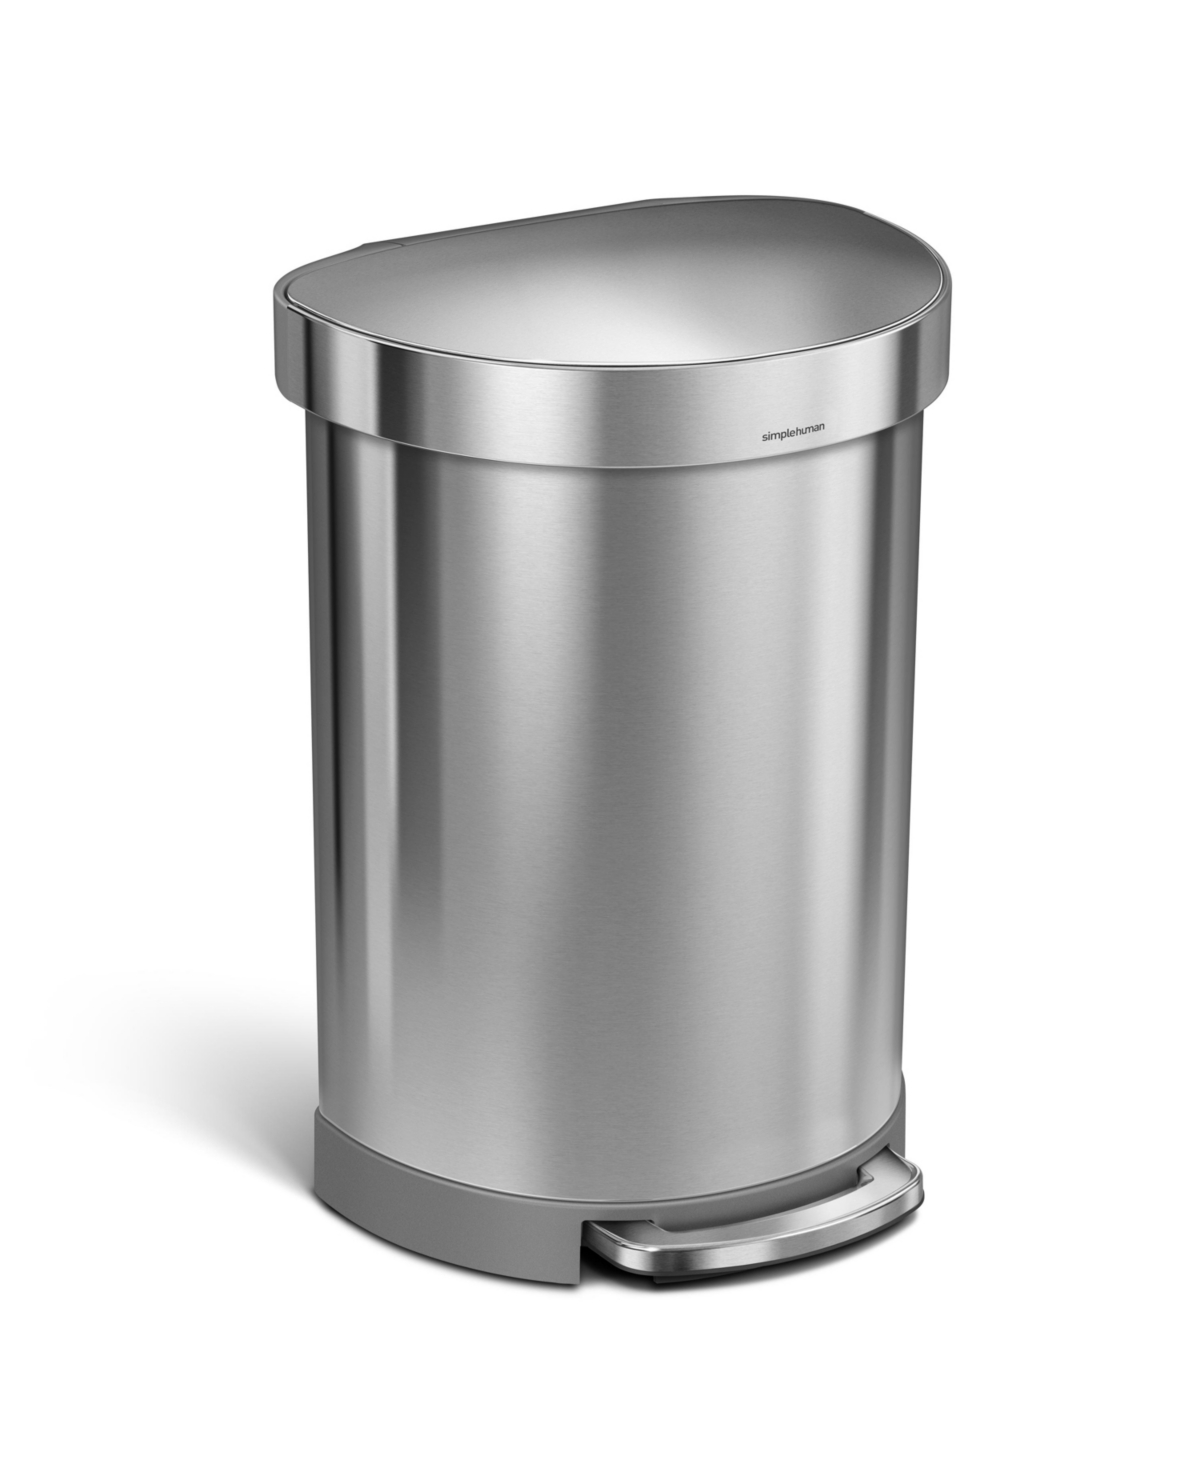 Simplehuman Semi-round Step Trash Can, 60 Liters In Brushed Stainless Steel